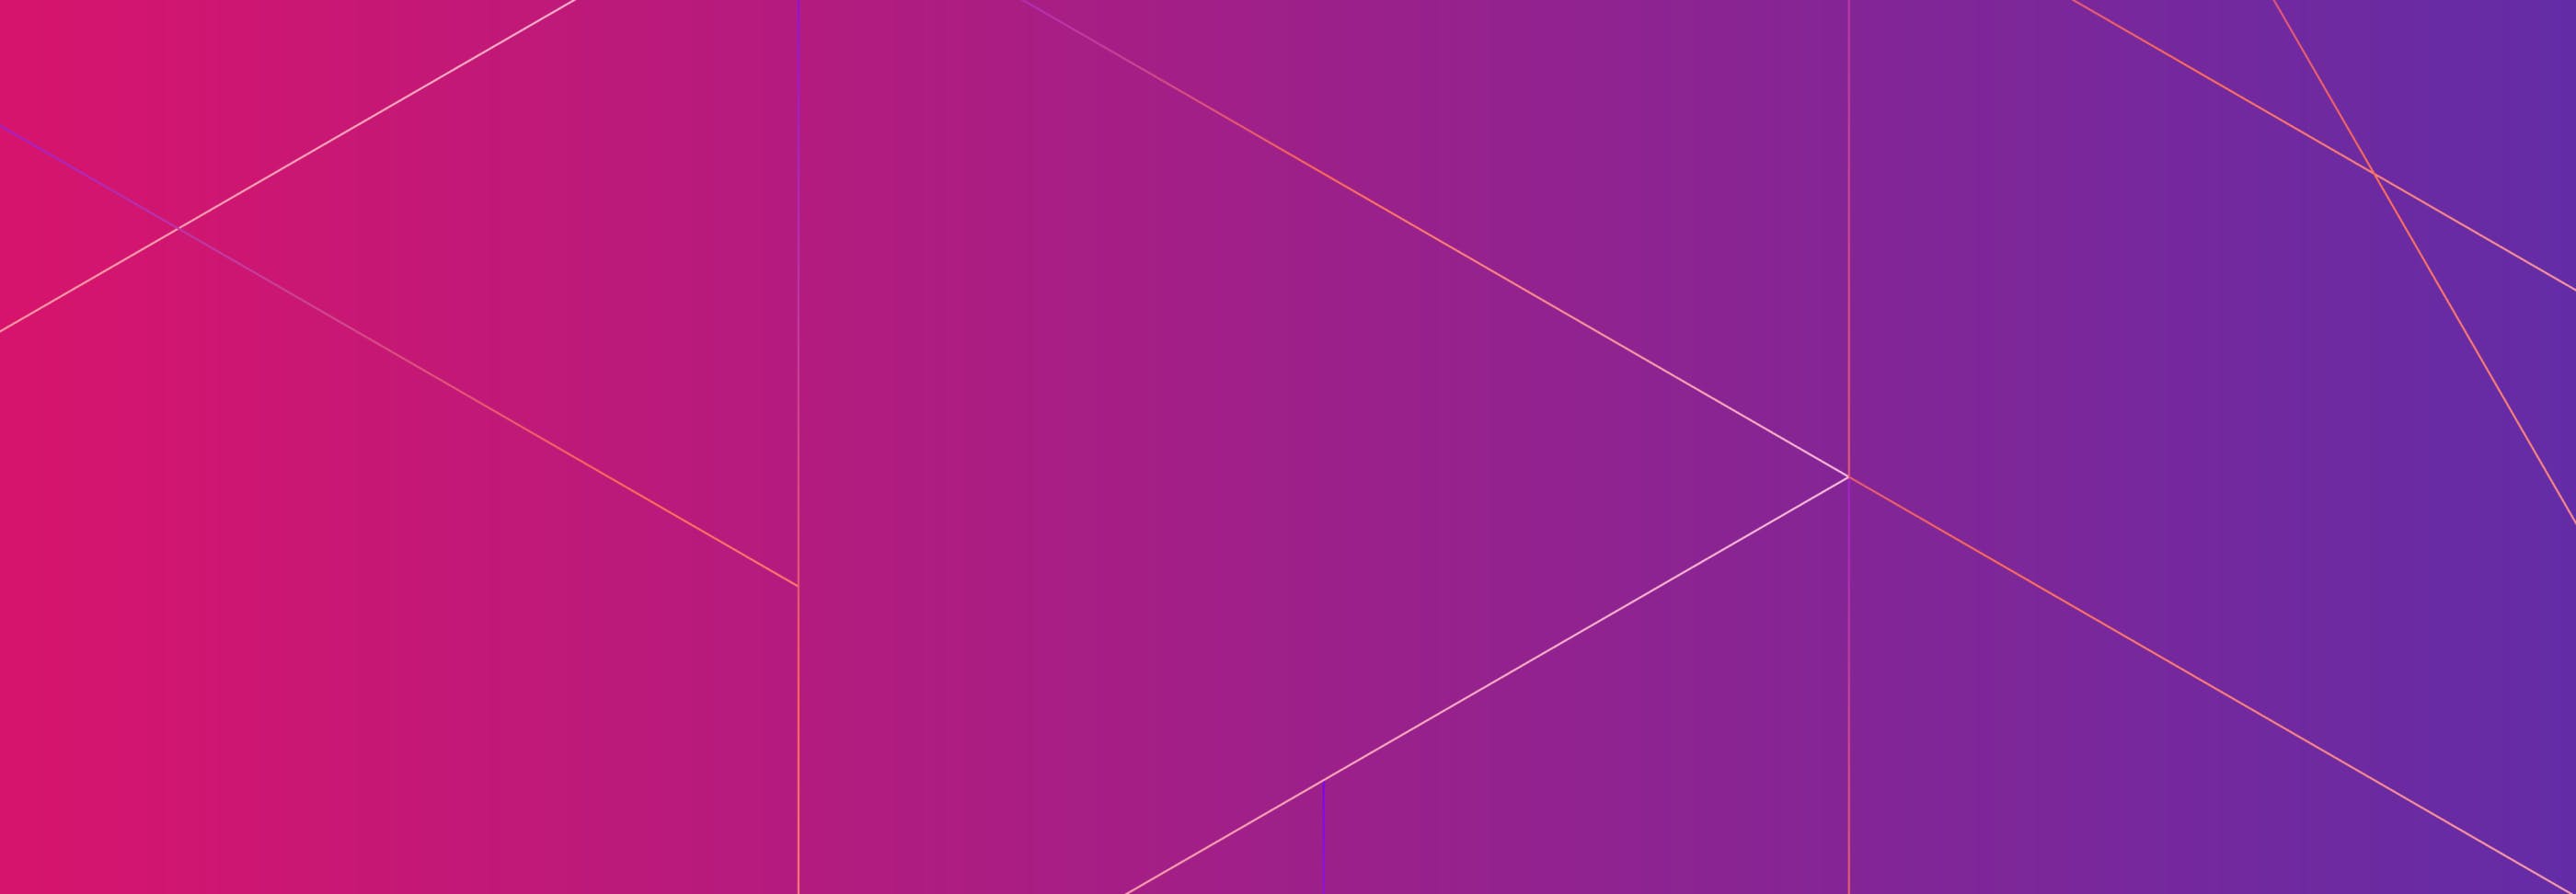 Datadog Adds Identity, Vulnerability and App-Level Findings to Security Inbox to Help DevOps and Security Teams Address Issues Quickly